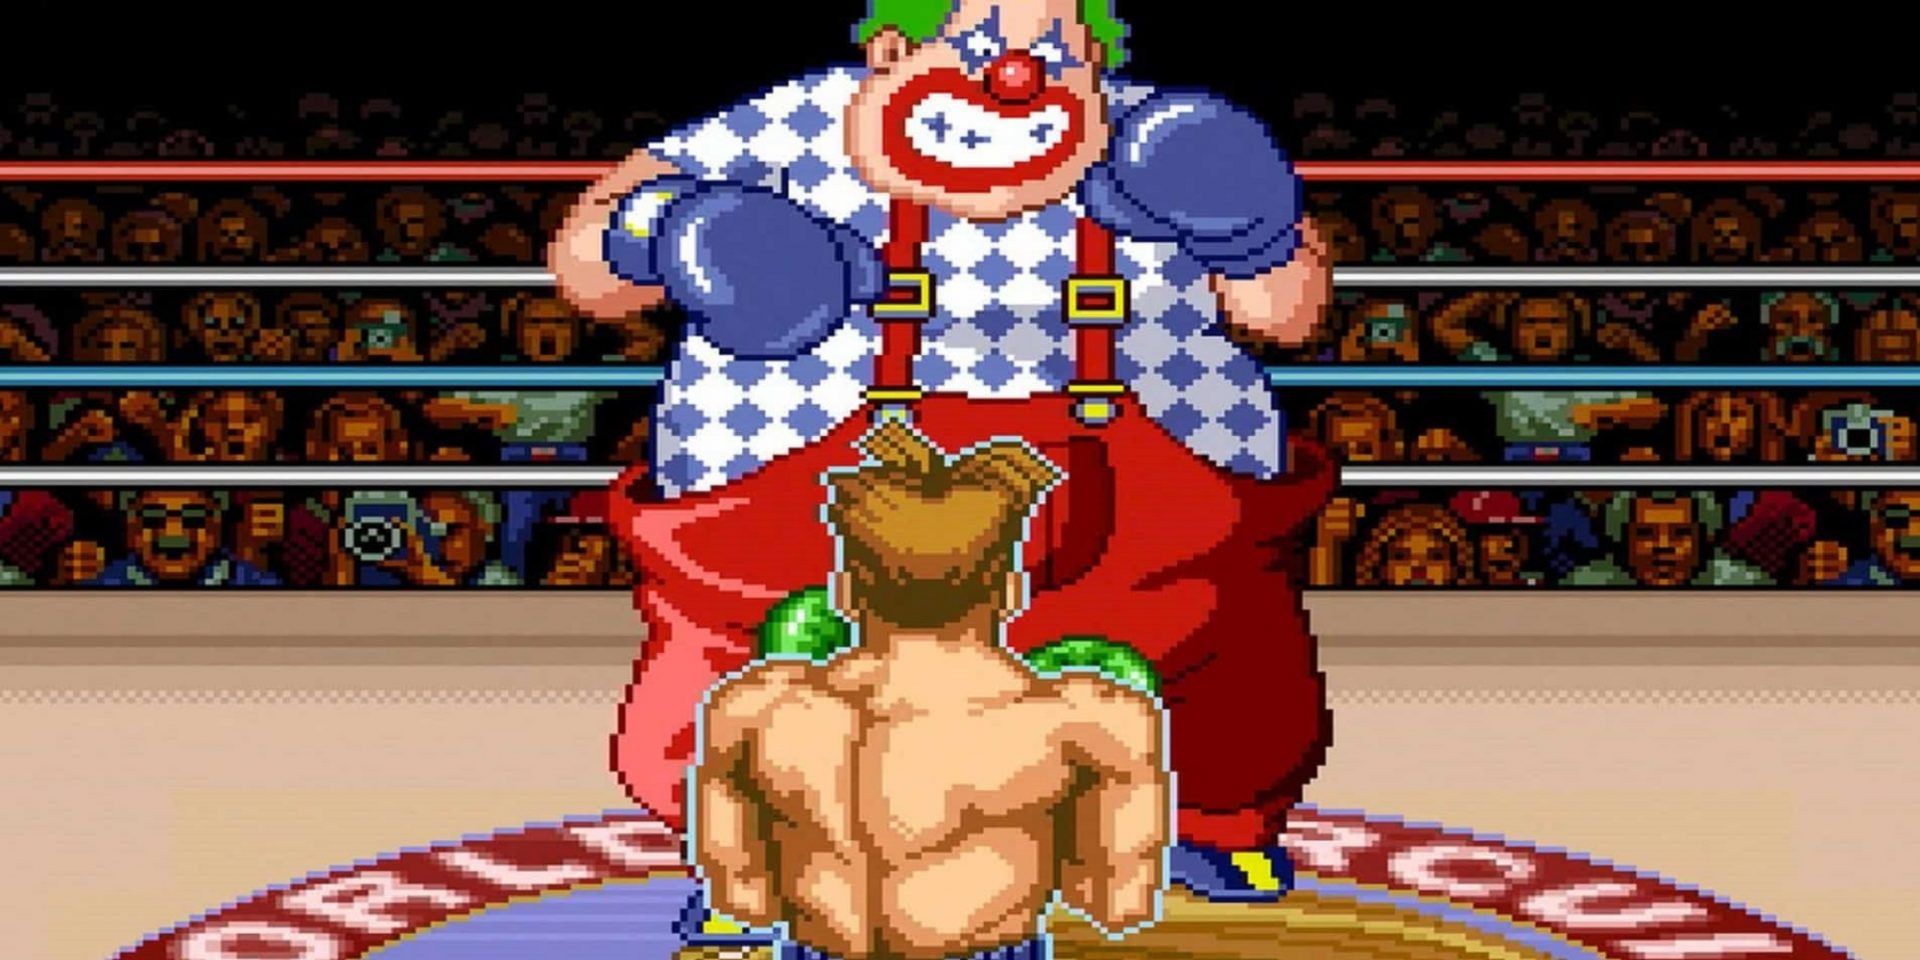 SNES Super Punch-Out!! Fighting Against Big Clown